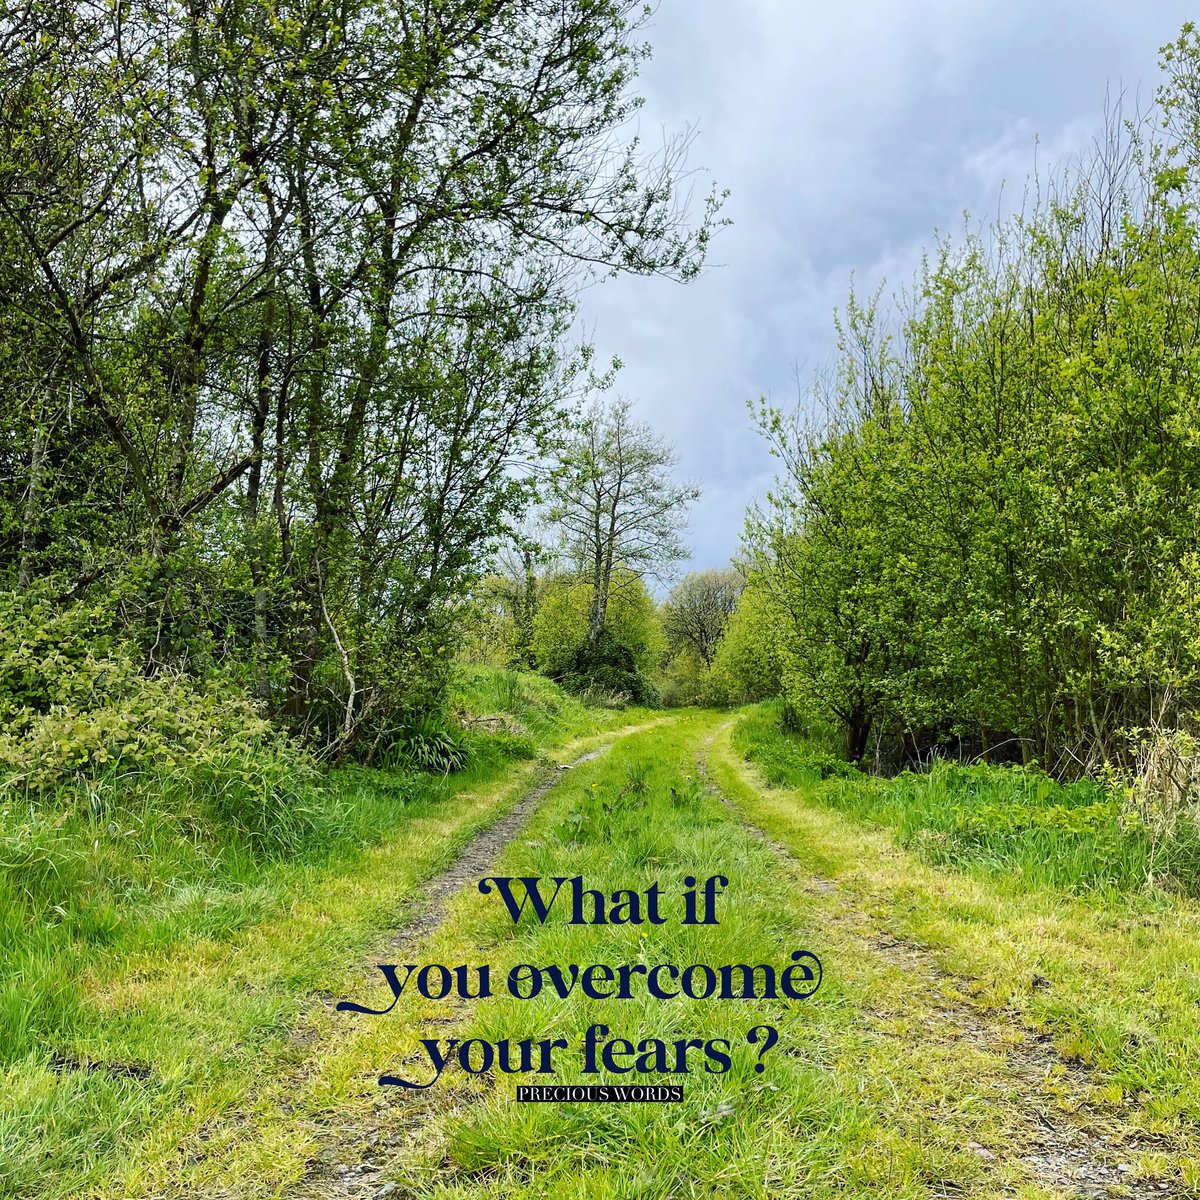 What if you overcome your fears?
#whatif #overcome #overcomeyourfears #preciouswordstoliveby #preciouswords